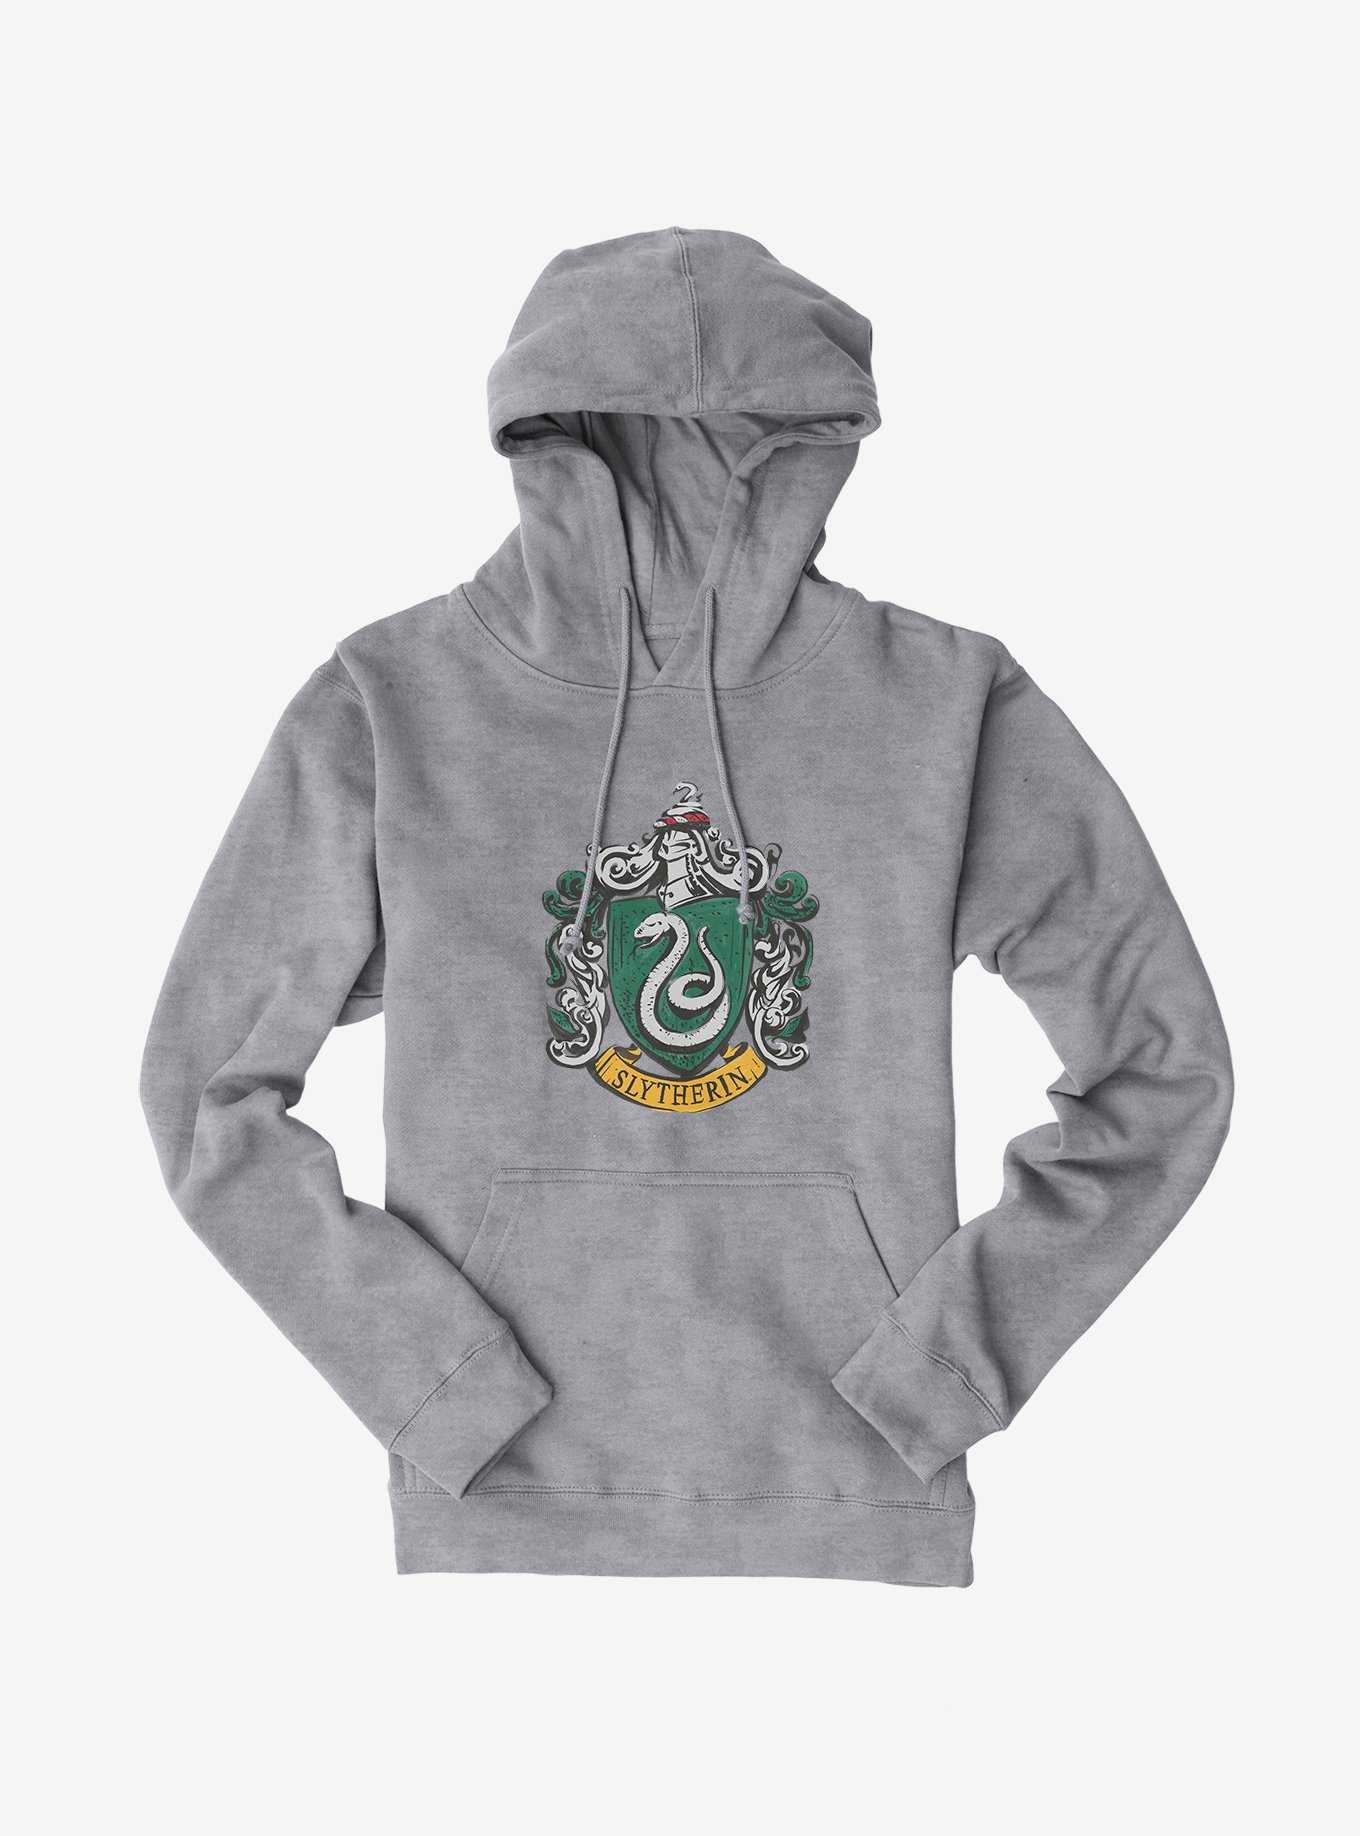 Hot Sweaters OFFICIAL & Hoodies | Topic Harry Potter